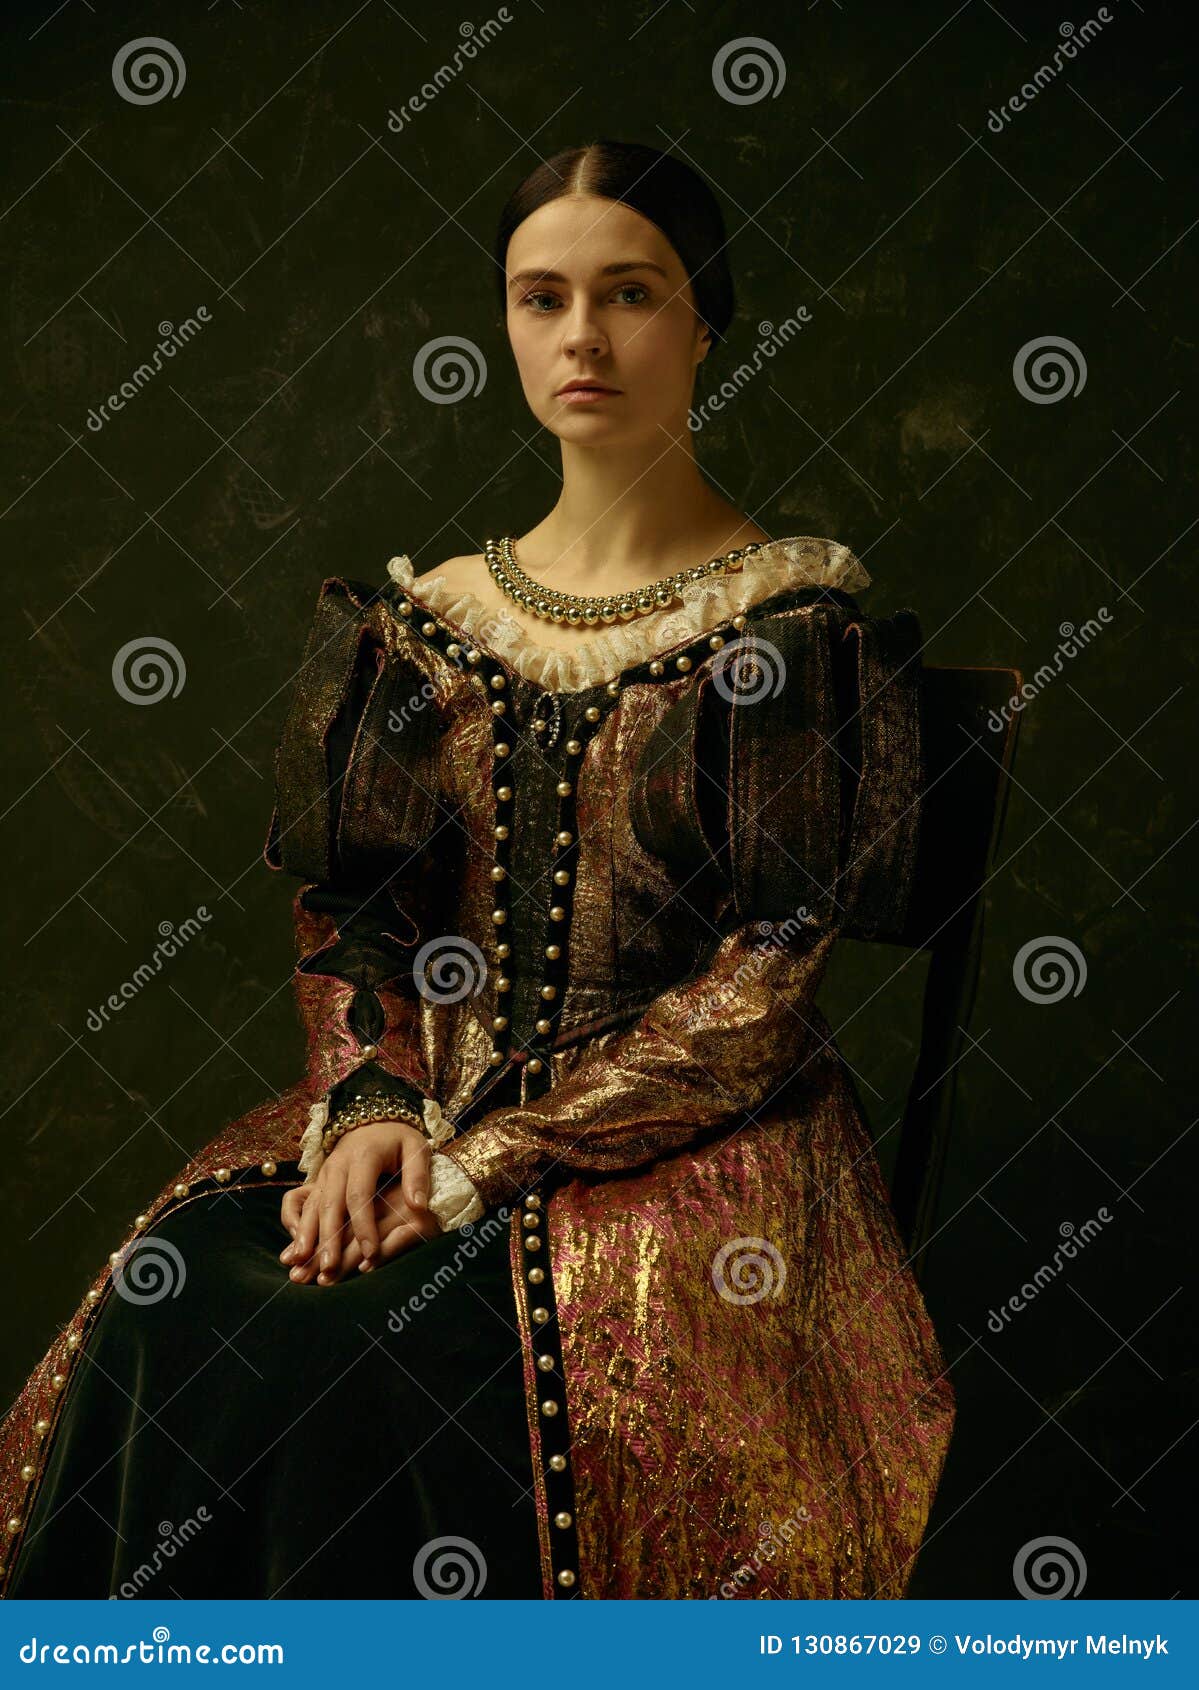 portrait of a girl wearing a retro princess or countess dress